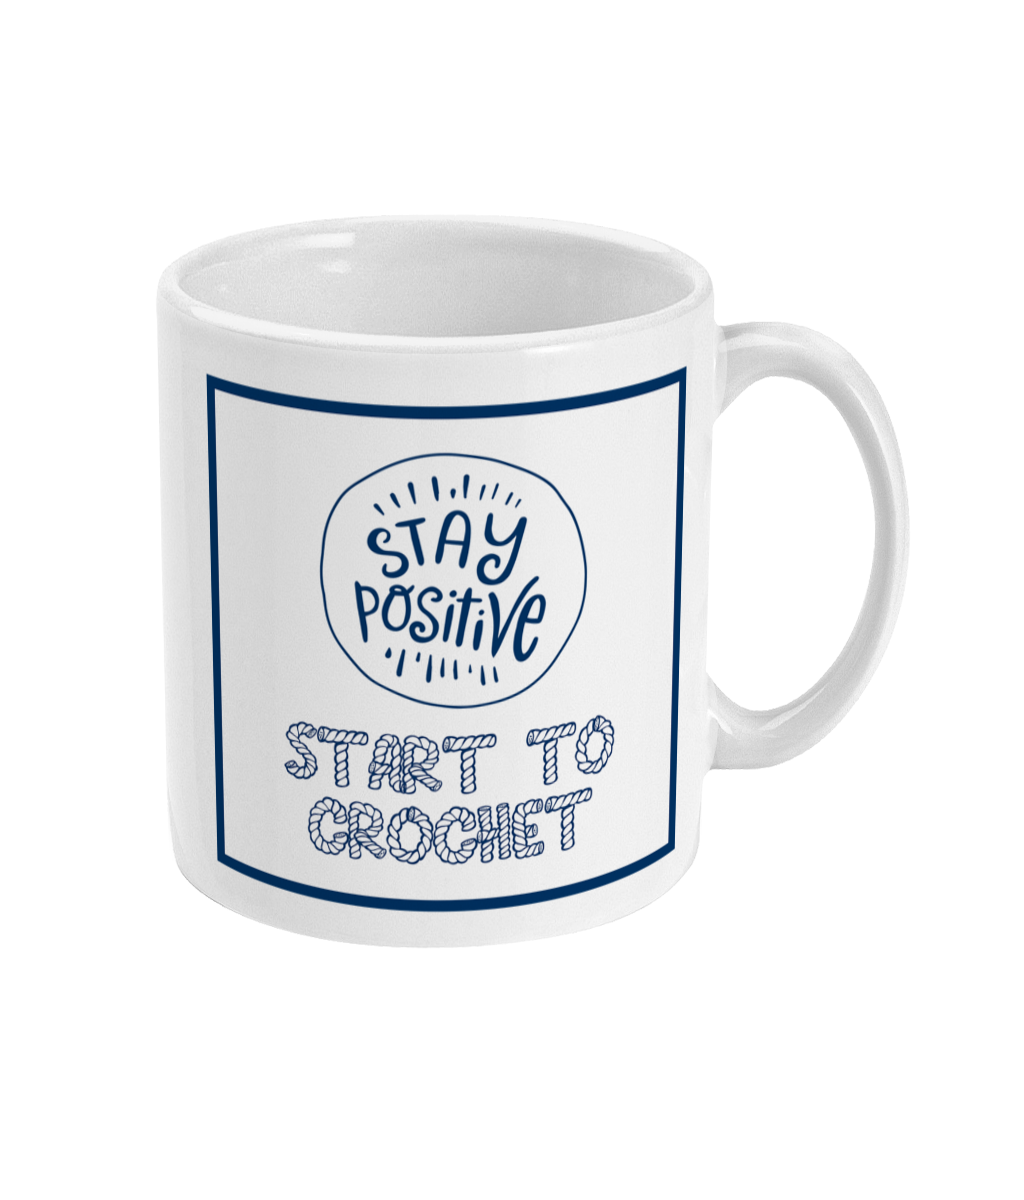 mug with stay positive images and the words start to crochet underneath